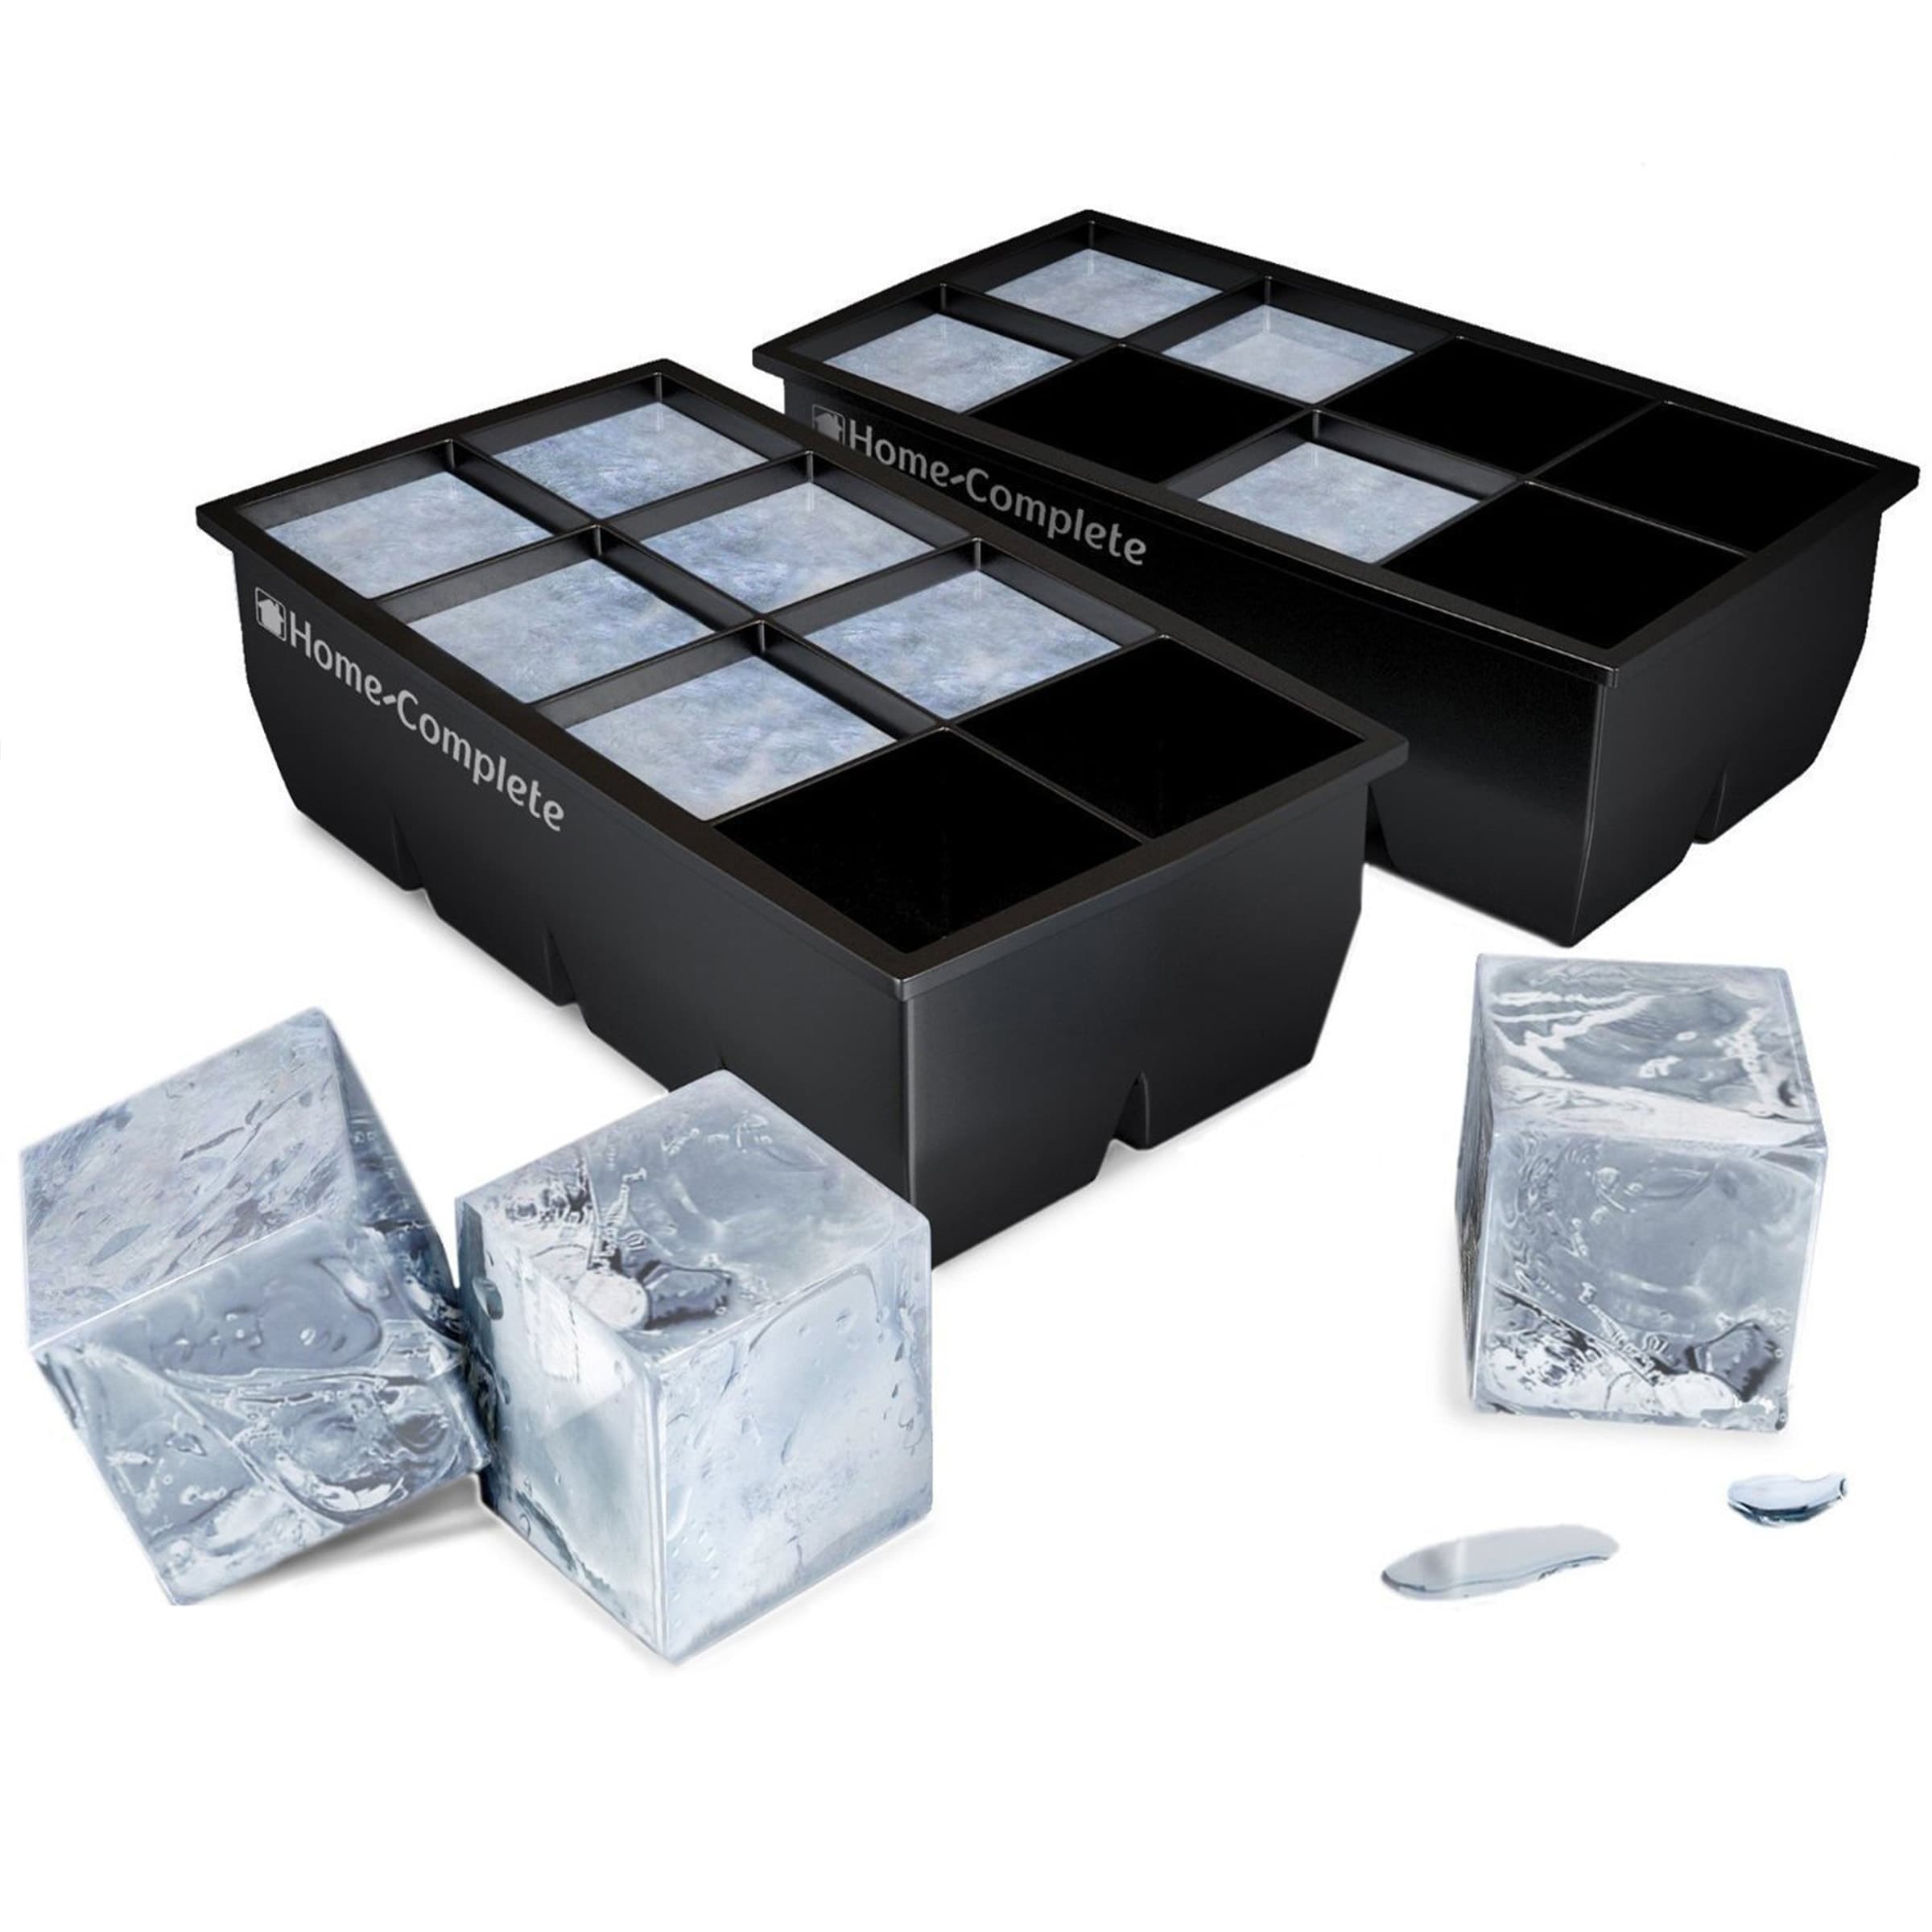 https://ak1.ostkcdn.com/images/products/is/images/direct/7f0b5aa4fa6ef66e5d9c3b131a7aeb9d84af3641/Large-Ice-Cube-Tray-by-Home-Complete-Set-of-2.jpg